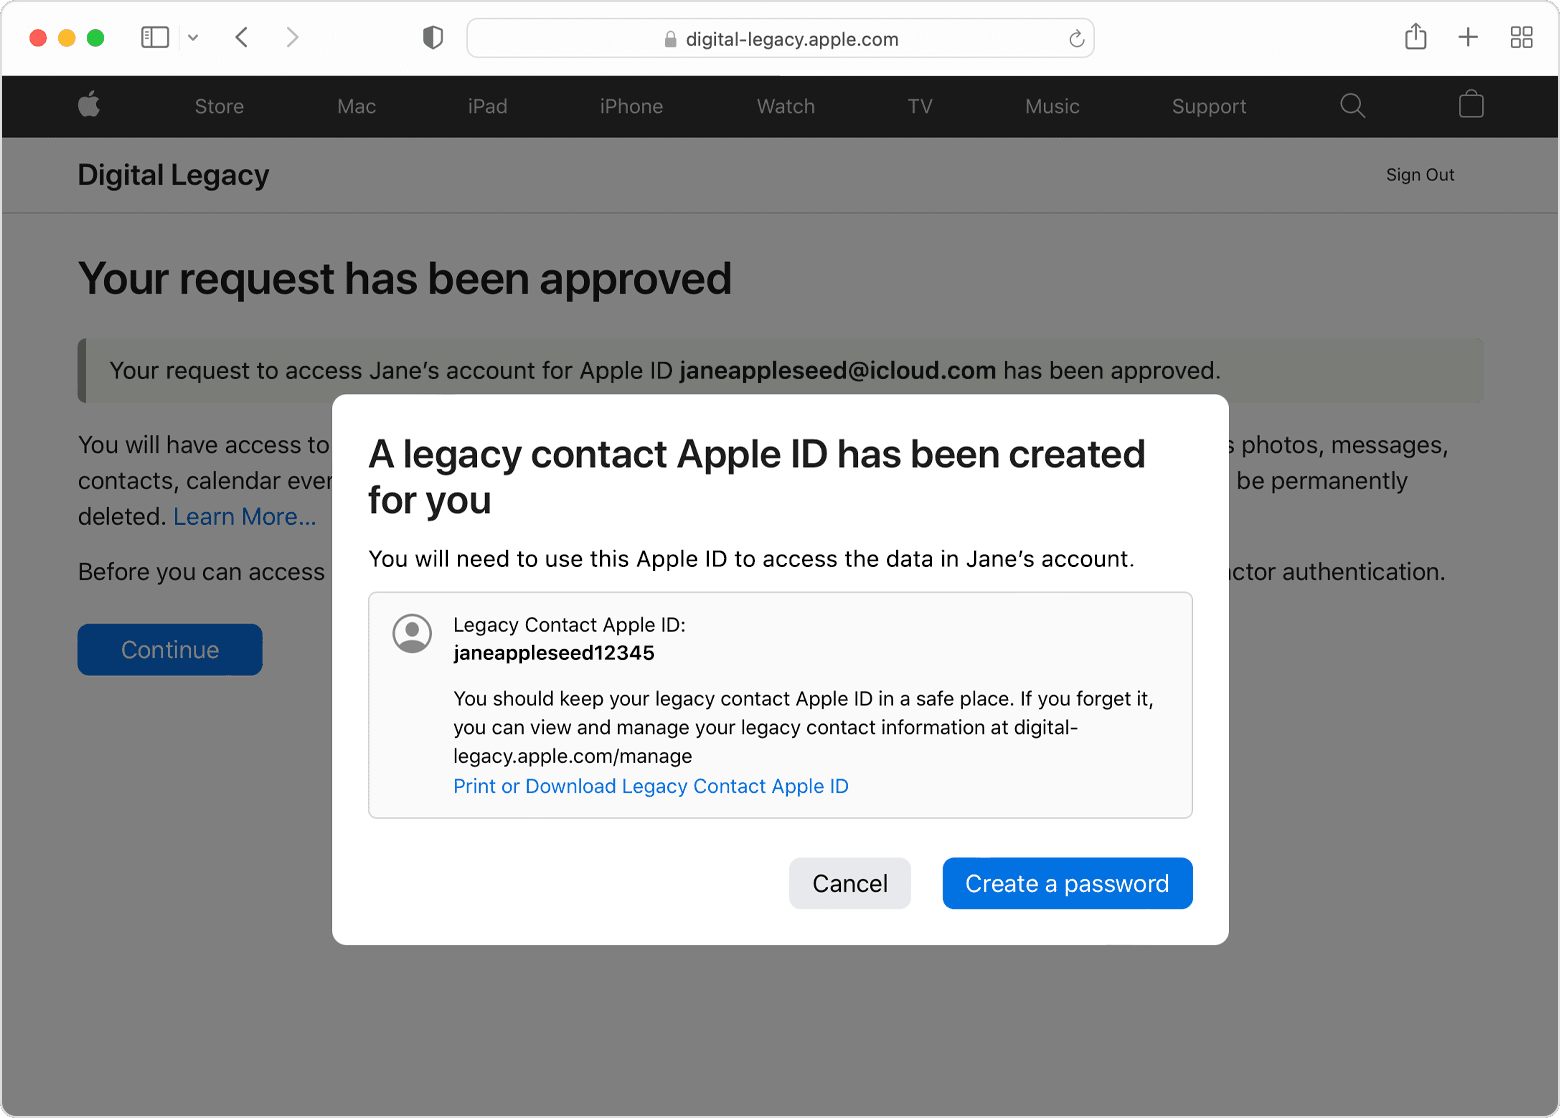 After your Legacy Contact request has been approved, a message will let you know that a Legacy Contact Apple ID has been created for you. You can print or download this Legacy Contact Apple ID, or tap the blue Create a password button.